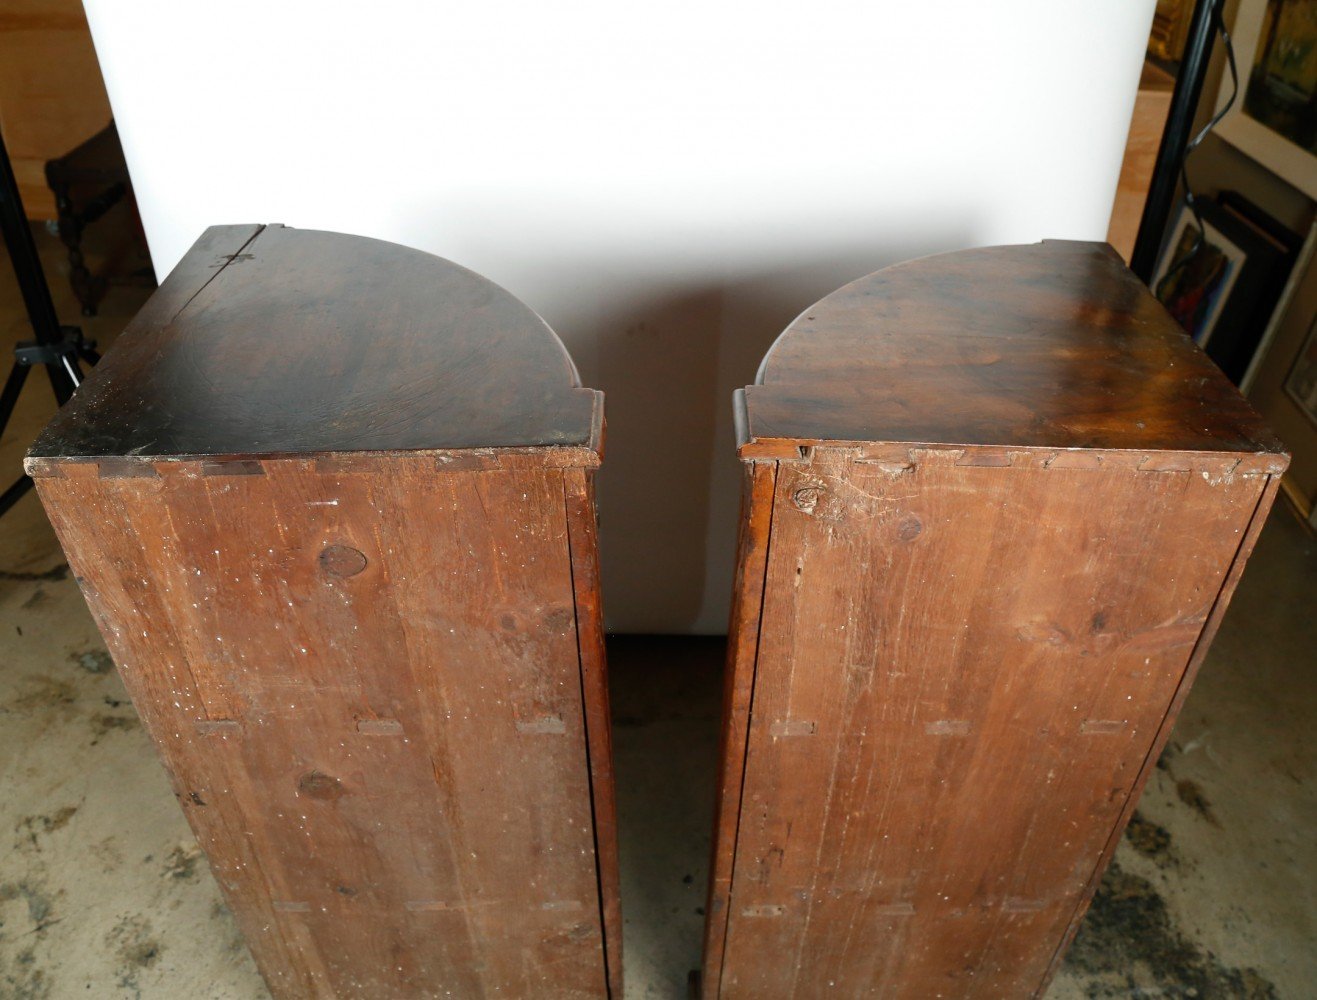 Wooden Decorative Arts: Pair of Small Provincial French Corner Cabinets